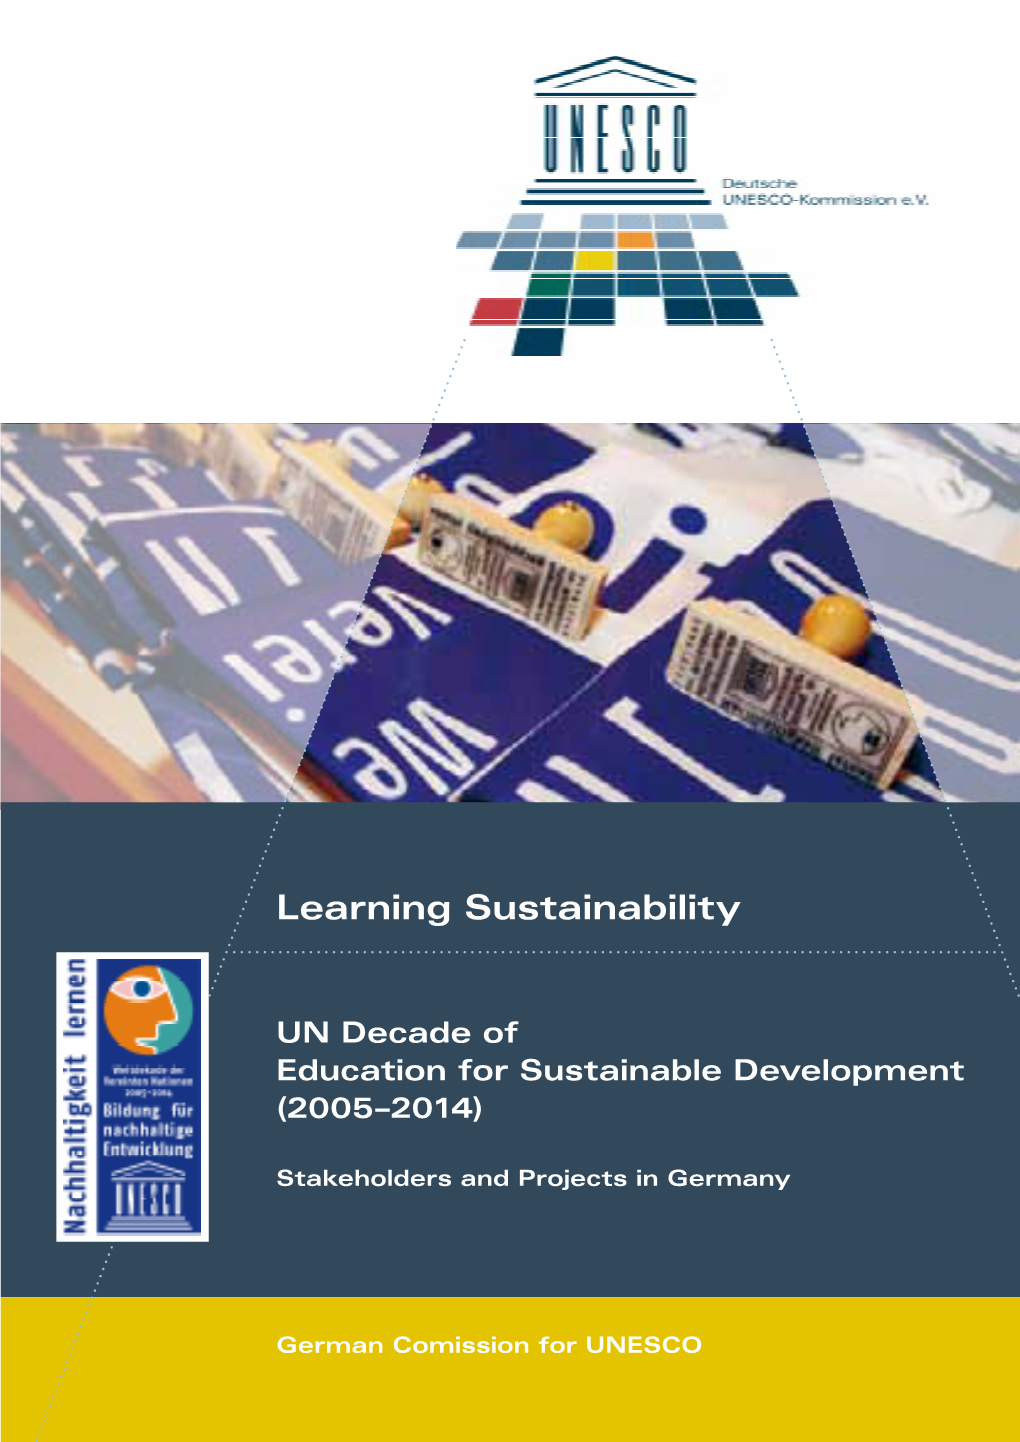 UN Decade of Education for Sustainable Development (2005–2014)